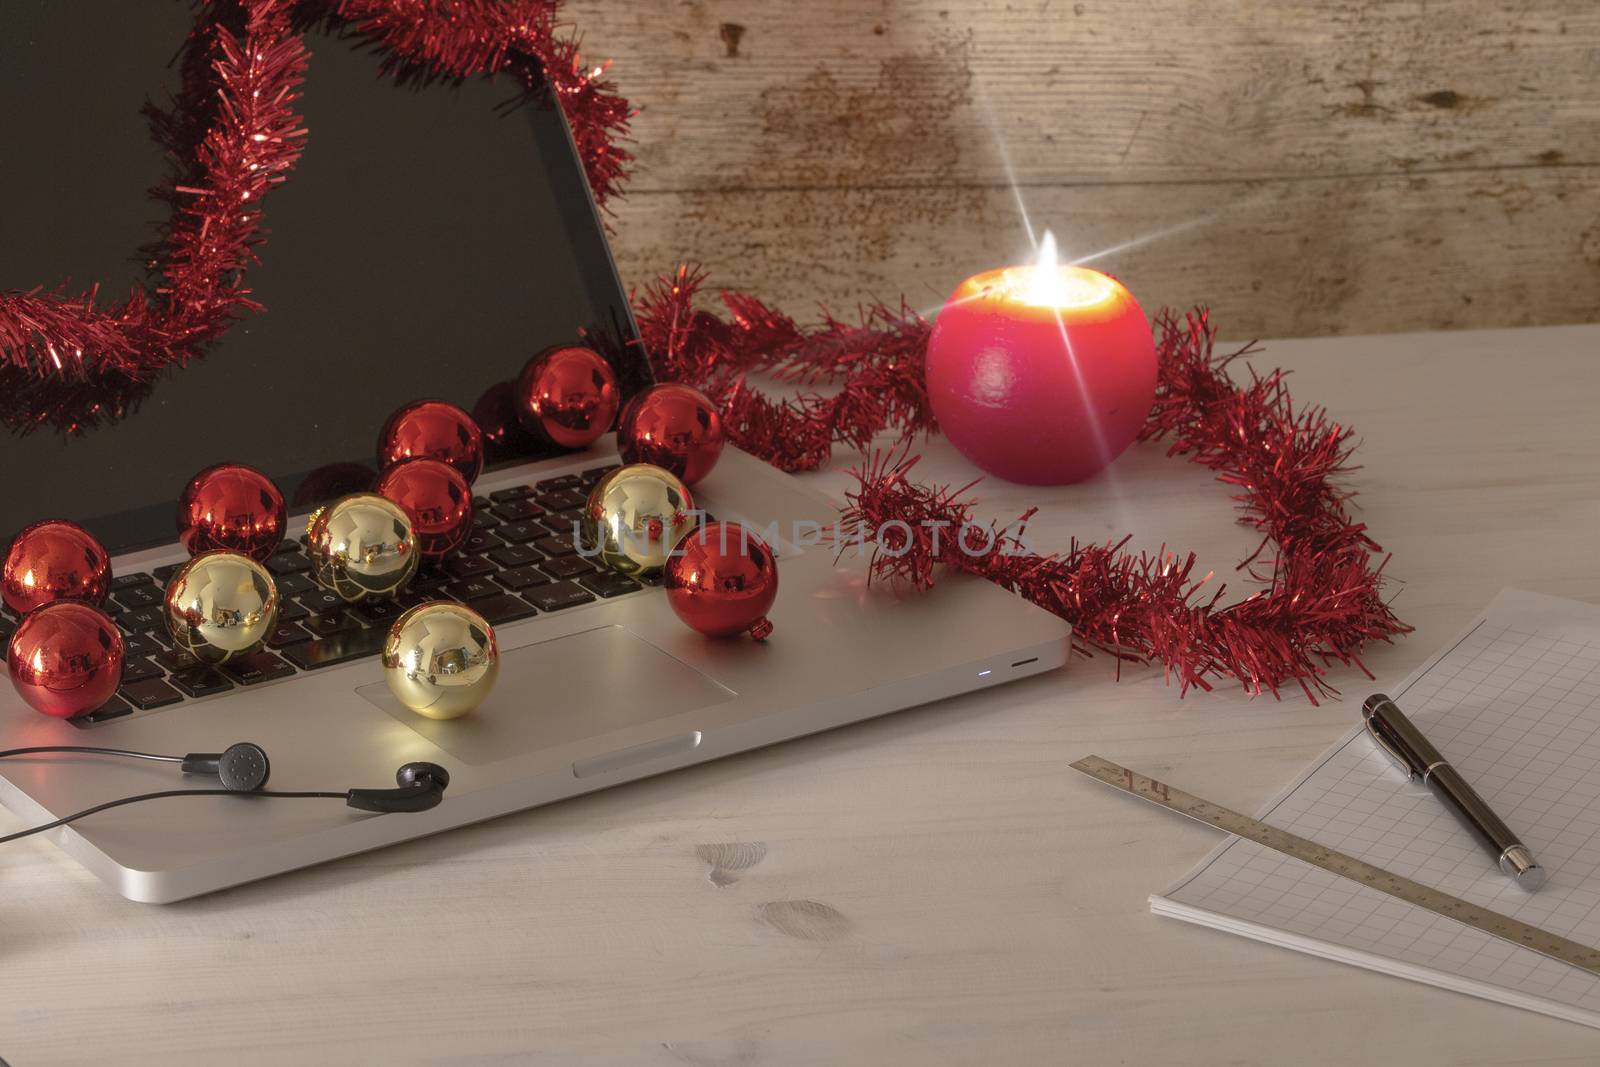 Computer job at Christmas holidays concept: an aluminum laptop open, red wreath decoration, red and gold baubles, lit candle, pen and ruler on block notes on light wooden table by robbyfontanesi